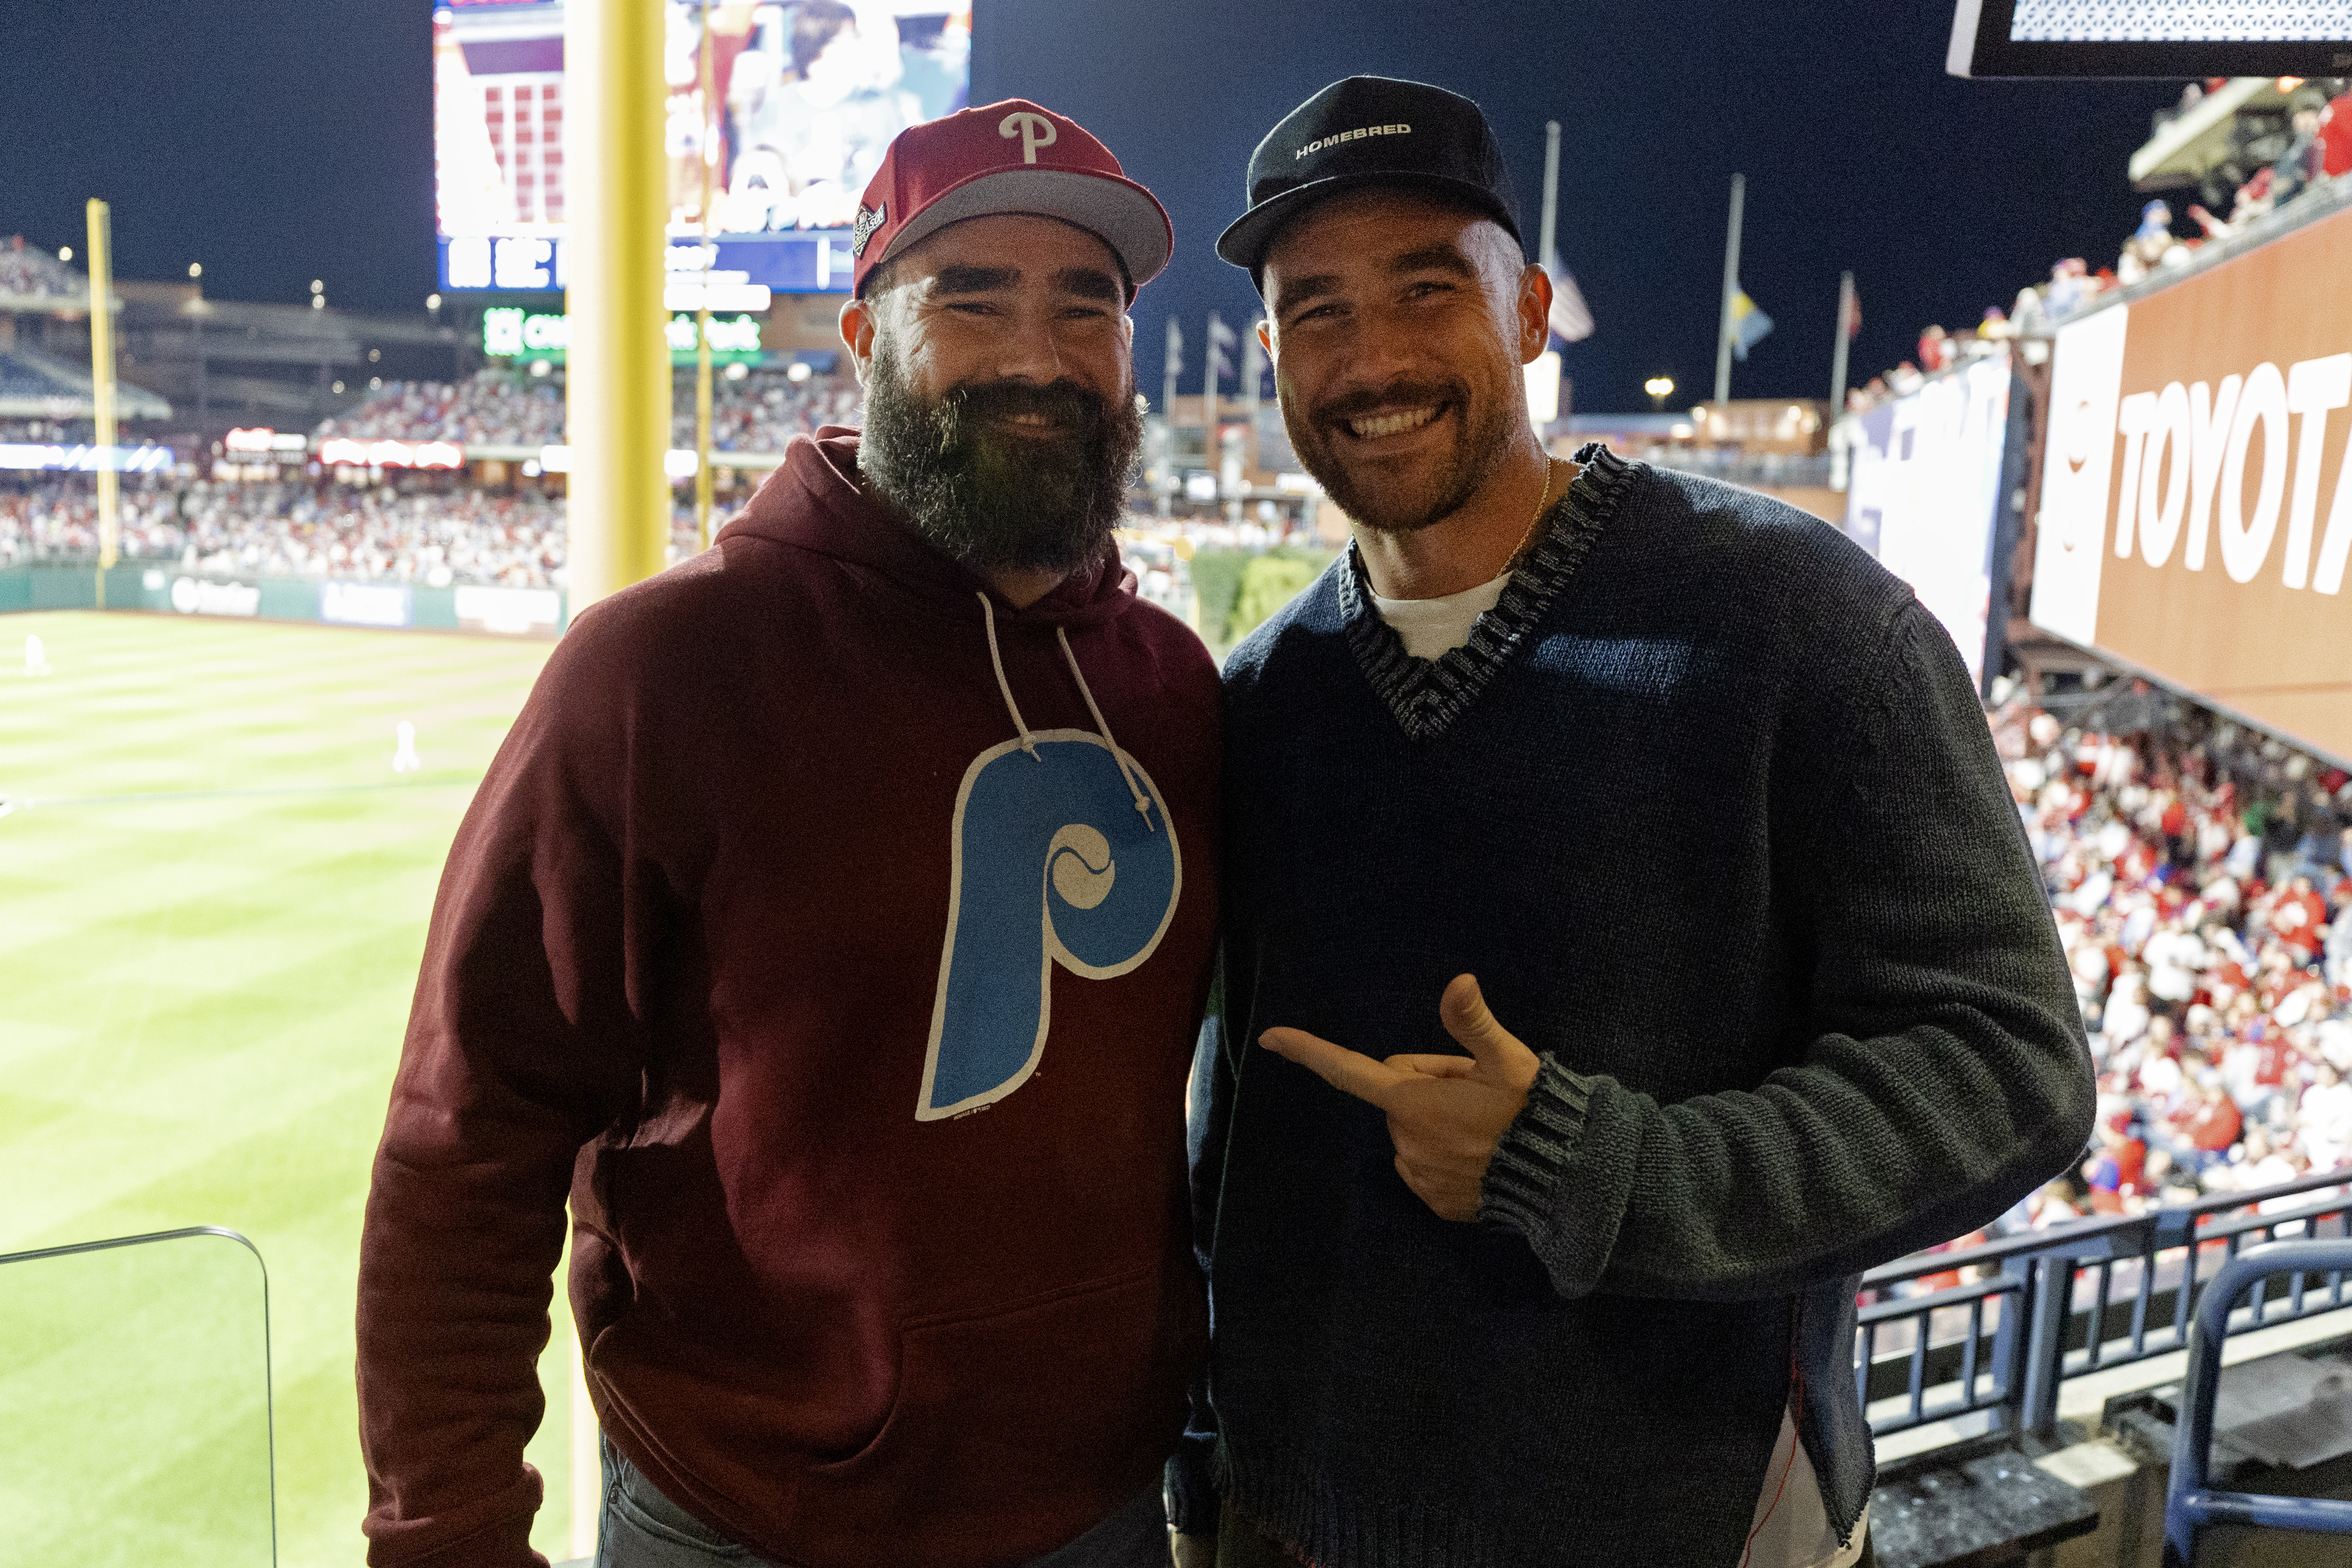 Close-up of Jason and Travis smiling and standing together at a sports stadium